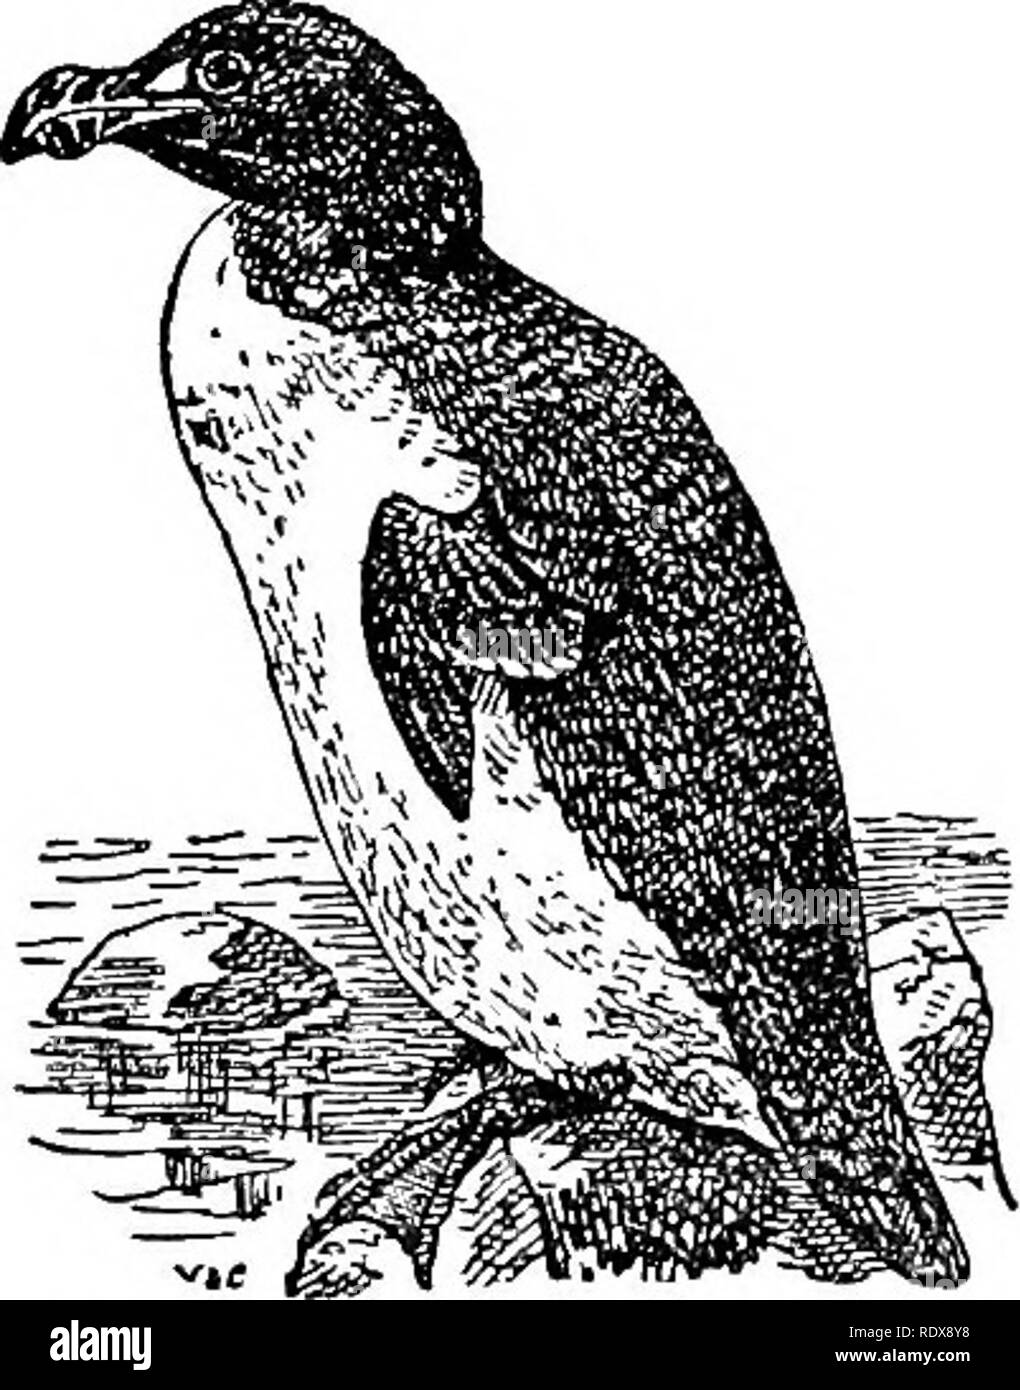 . Natural history. Zoology. 26o AVES—ORDER ALCIFORMES.. Fig 24,—TheOkeat Auk (Ptdutus impennis). One of the most interesting of all the Alcce is the great auk, which was a kind of gigantic razorbill, but possessing such diminutive wings that the power of flight was denied to it. It has become extinct during the first half of the present century, and specimens of the bird and the egg fetch larire prices whenever they come into the market. The great auk, as Professor Newton has pointed out, owes its extinction entirely to the agency of man who hunted the bird to its destruction. It seems to have Stock Photo